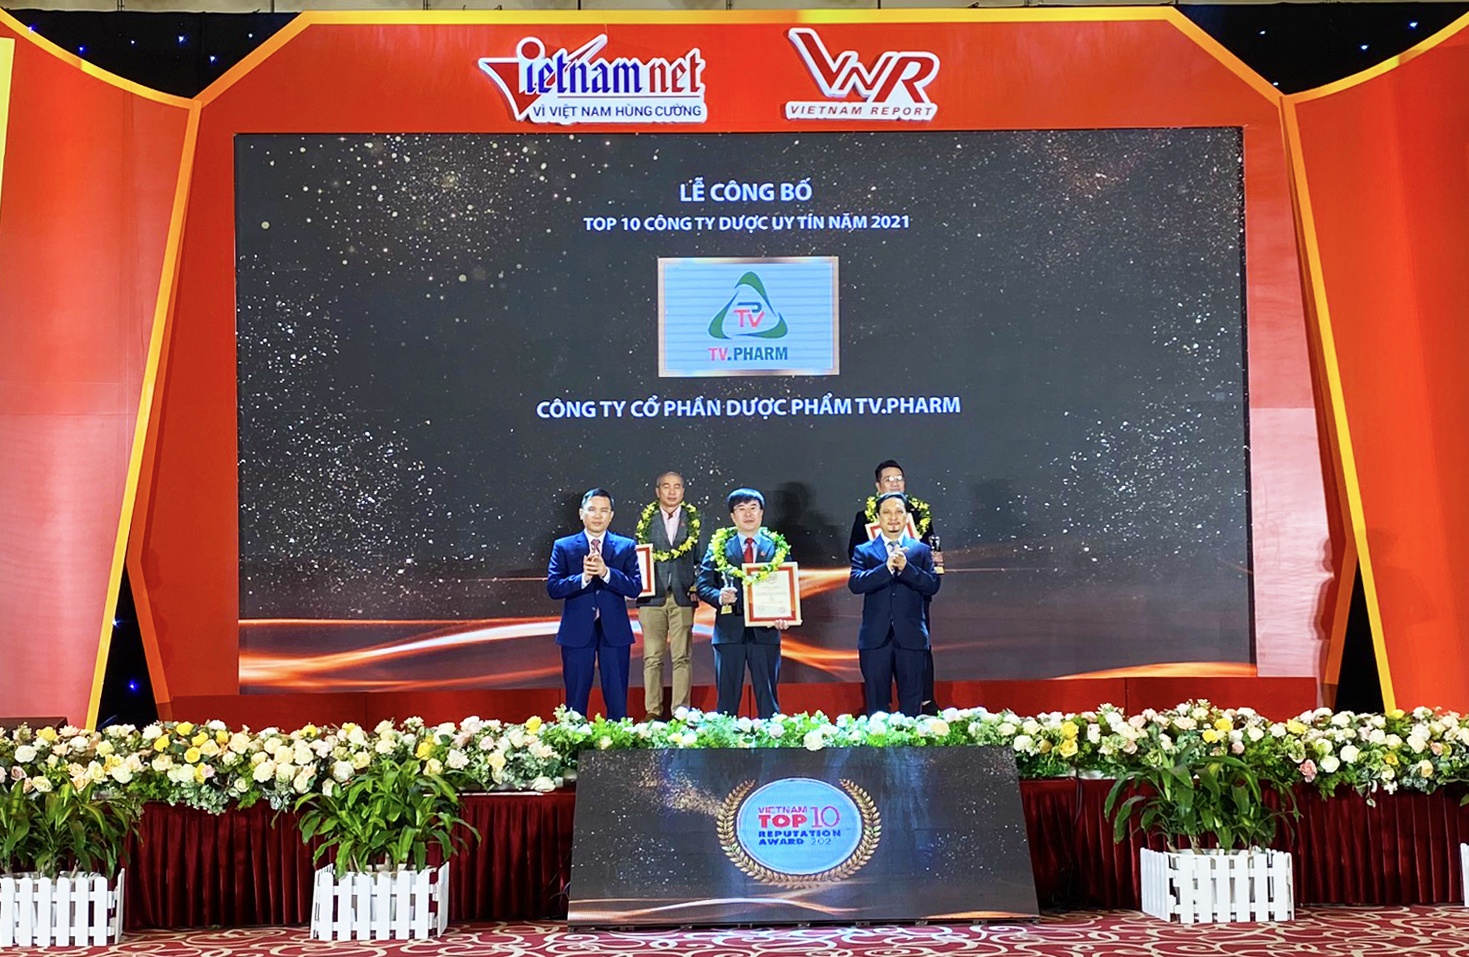 Ha Ngoc Son, TV.Pharm president (in the middle) receives the Cup of Honour and certification of “Top ten prestigious Vietnamese pharmaceutical companies in 2021”.